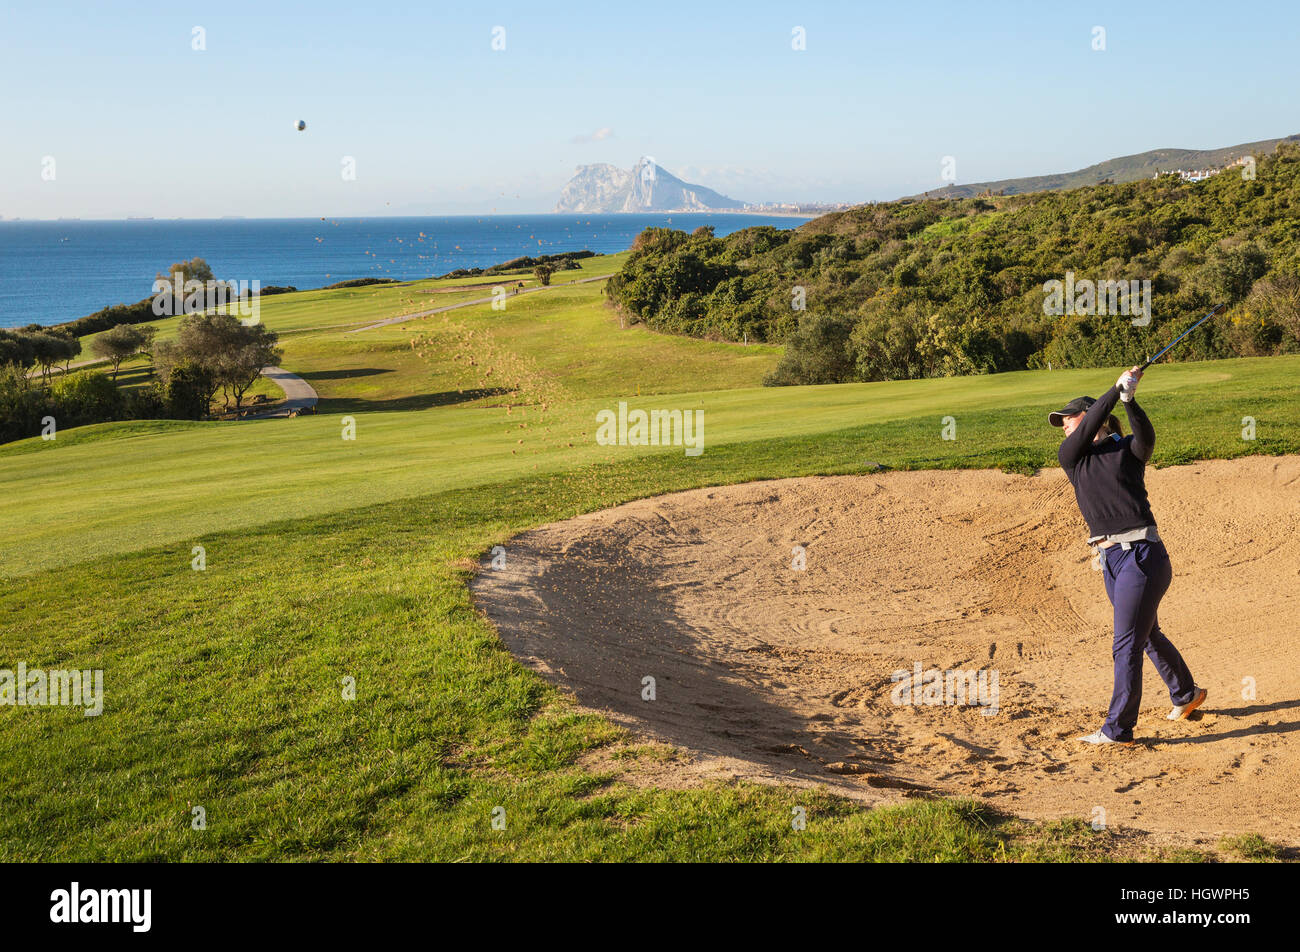 Golfer hitting from bunker at La Alcaidesa Golf Resort with Mediterranean Sea and Rock of Gibraltar, Cádiz, Andalusia, Spain Stock Photo